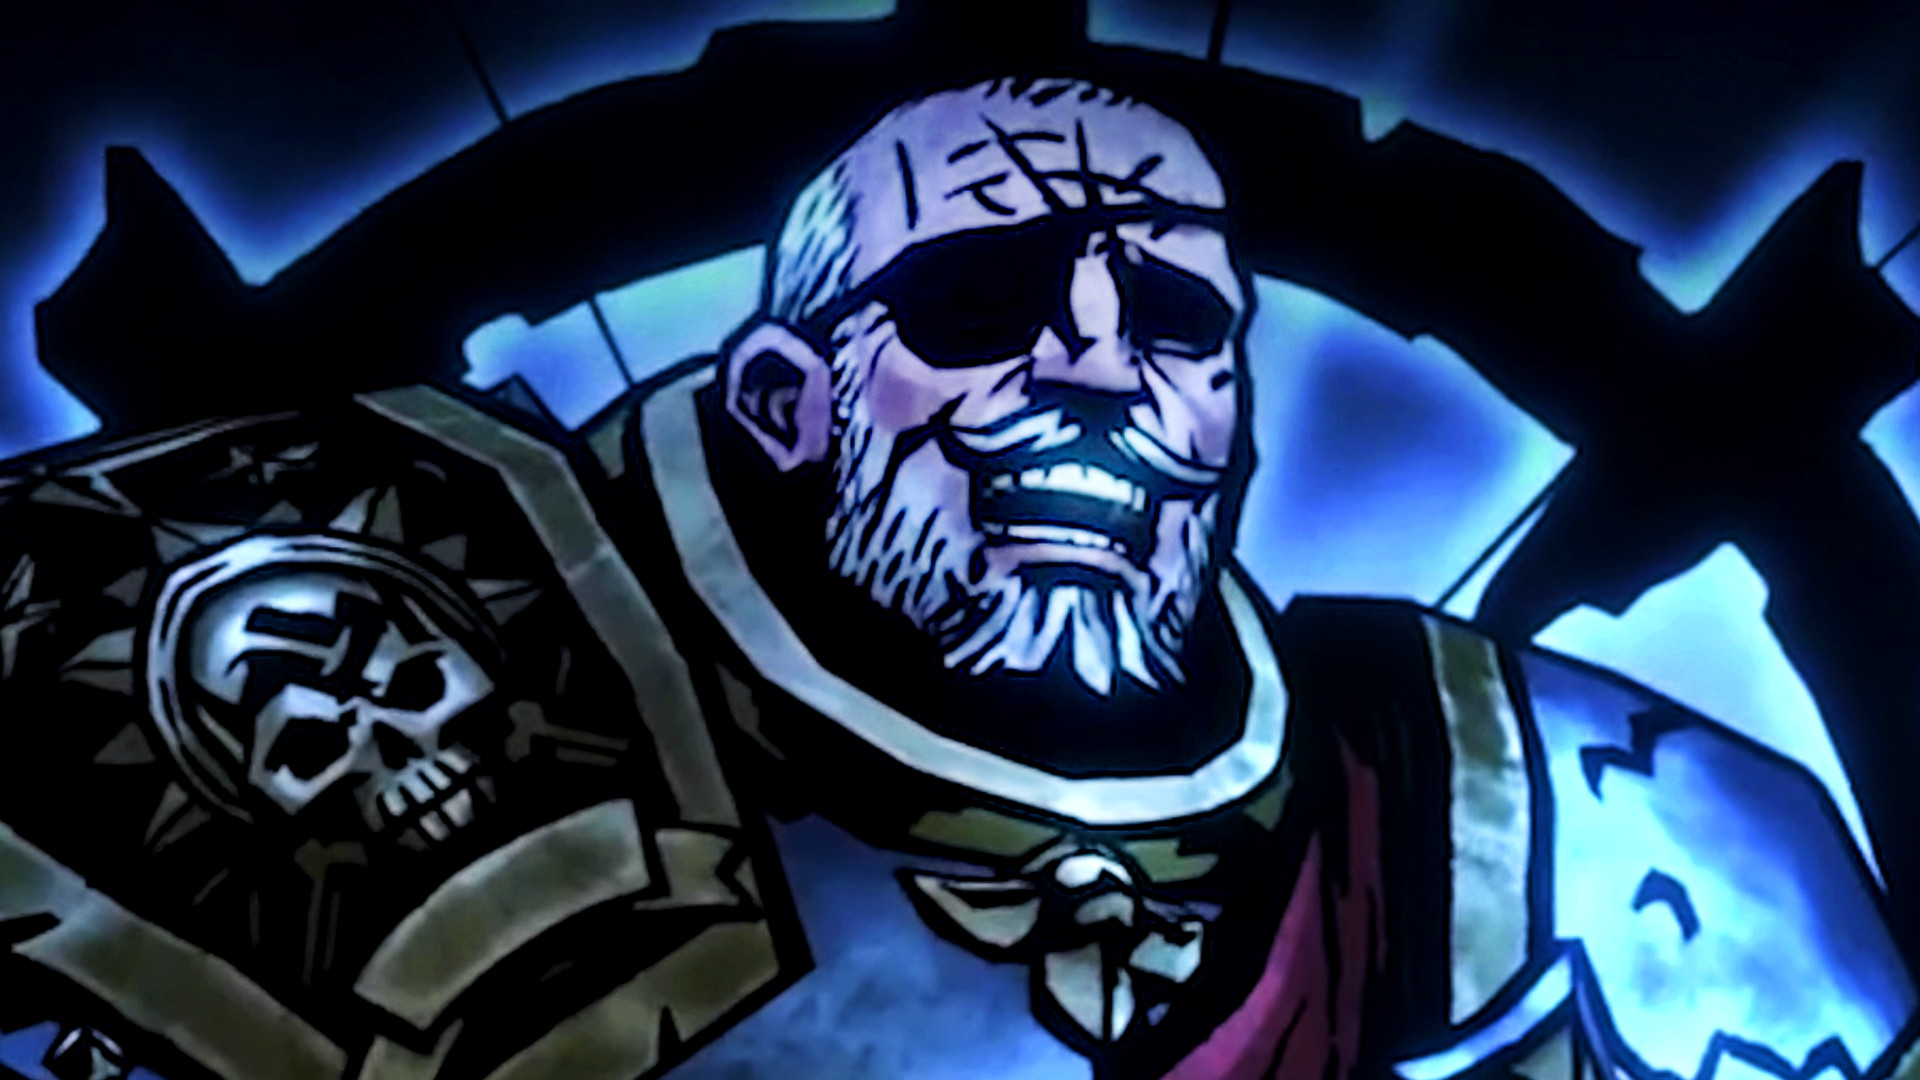 Final Darkest Dungeon 2 update before launch adds pets, out now